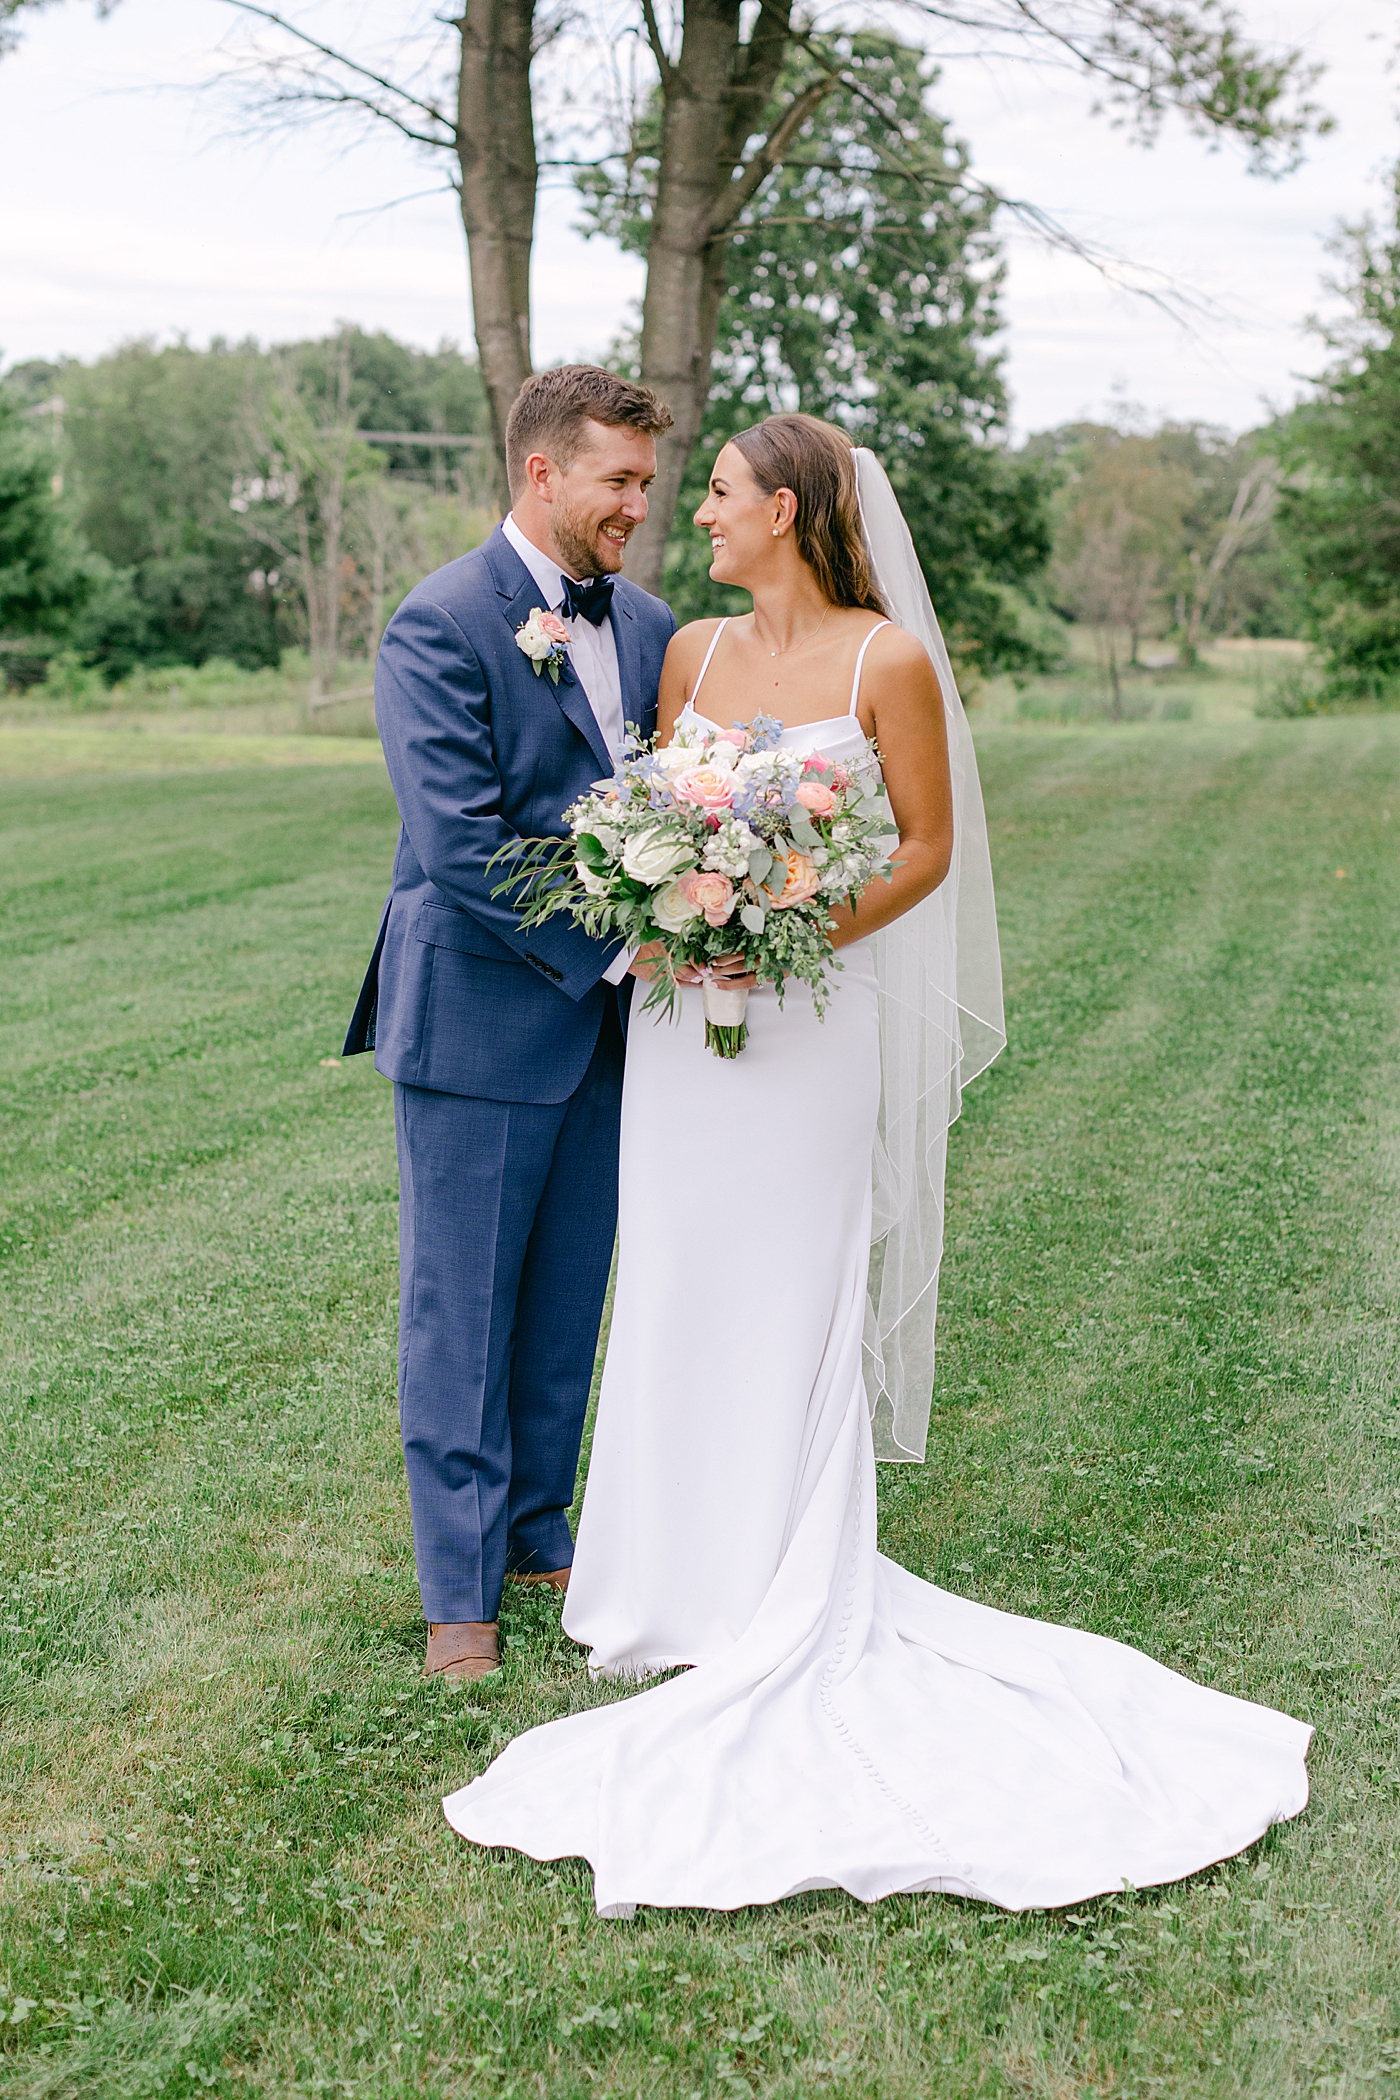 Bride and groom smiling during portraits | Image by Hope Helmuth Photography